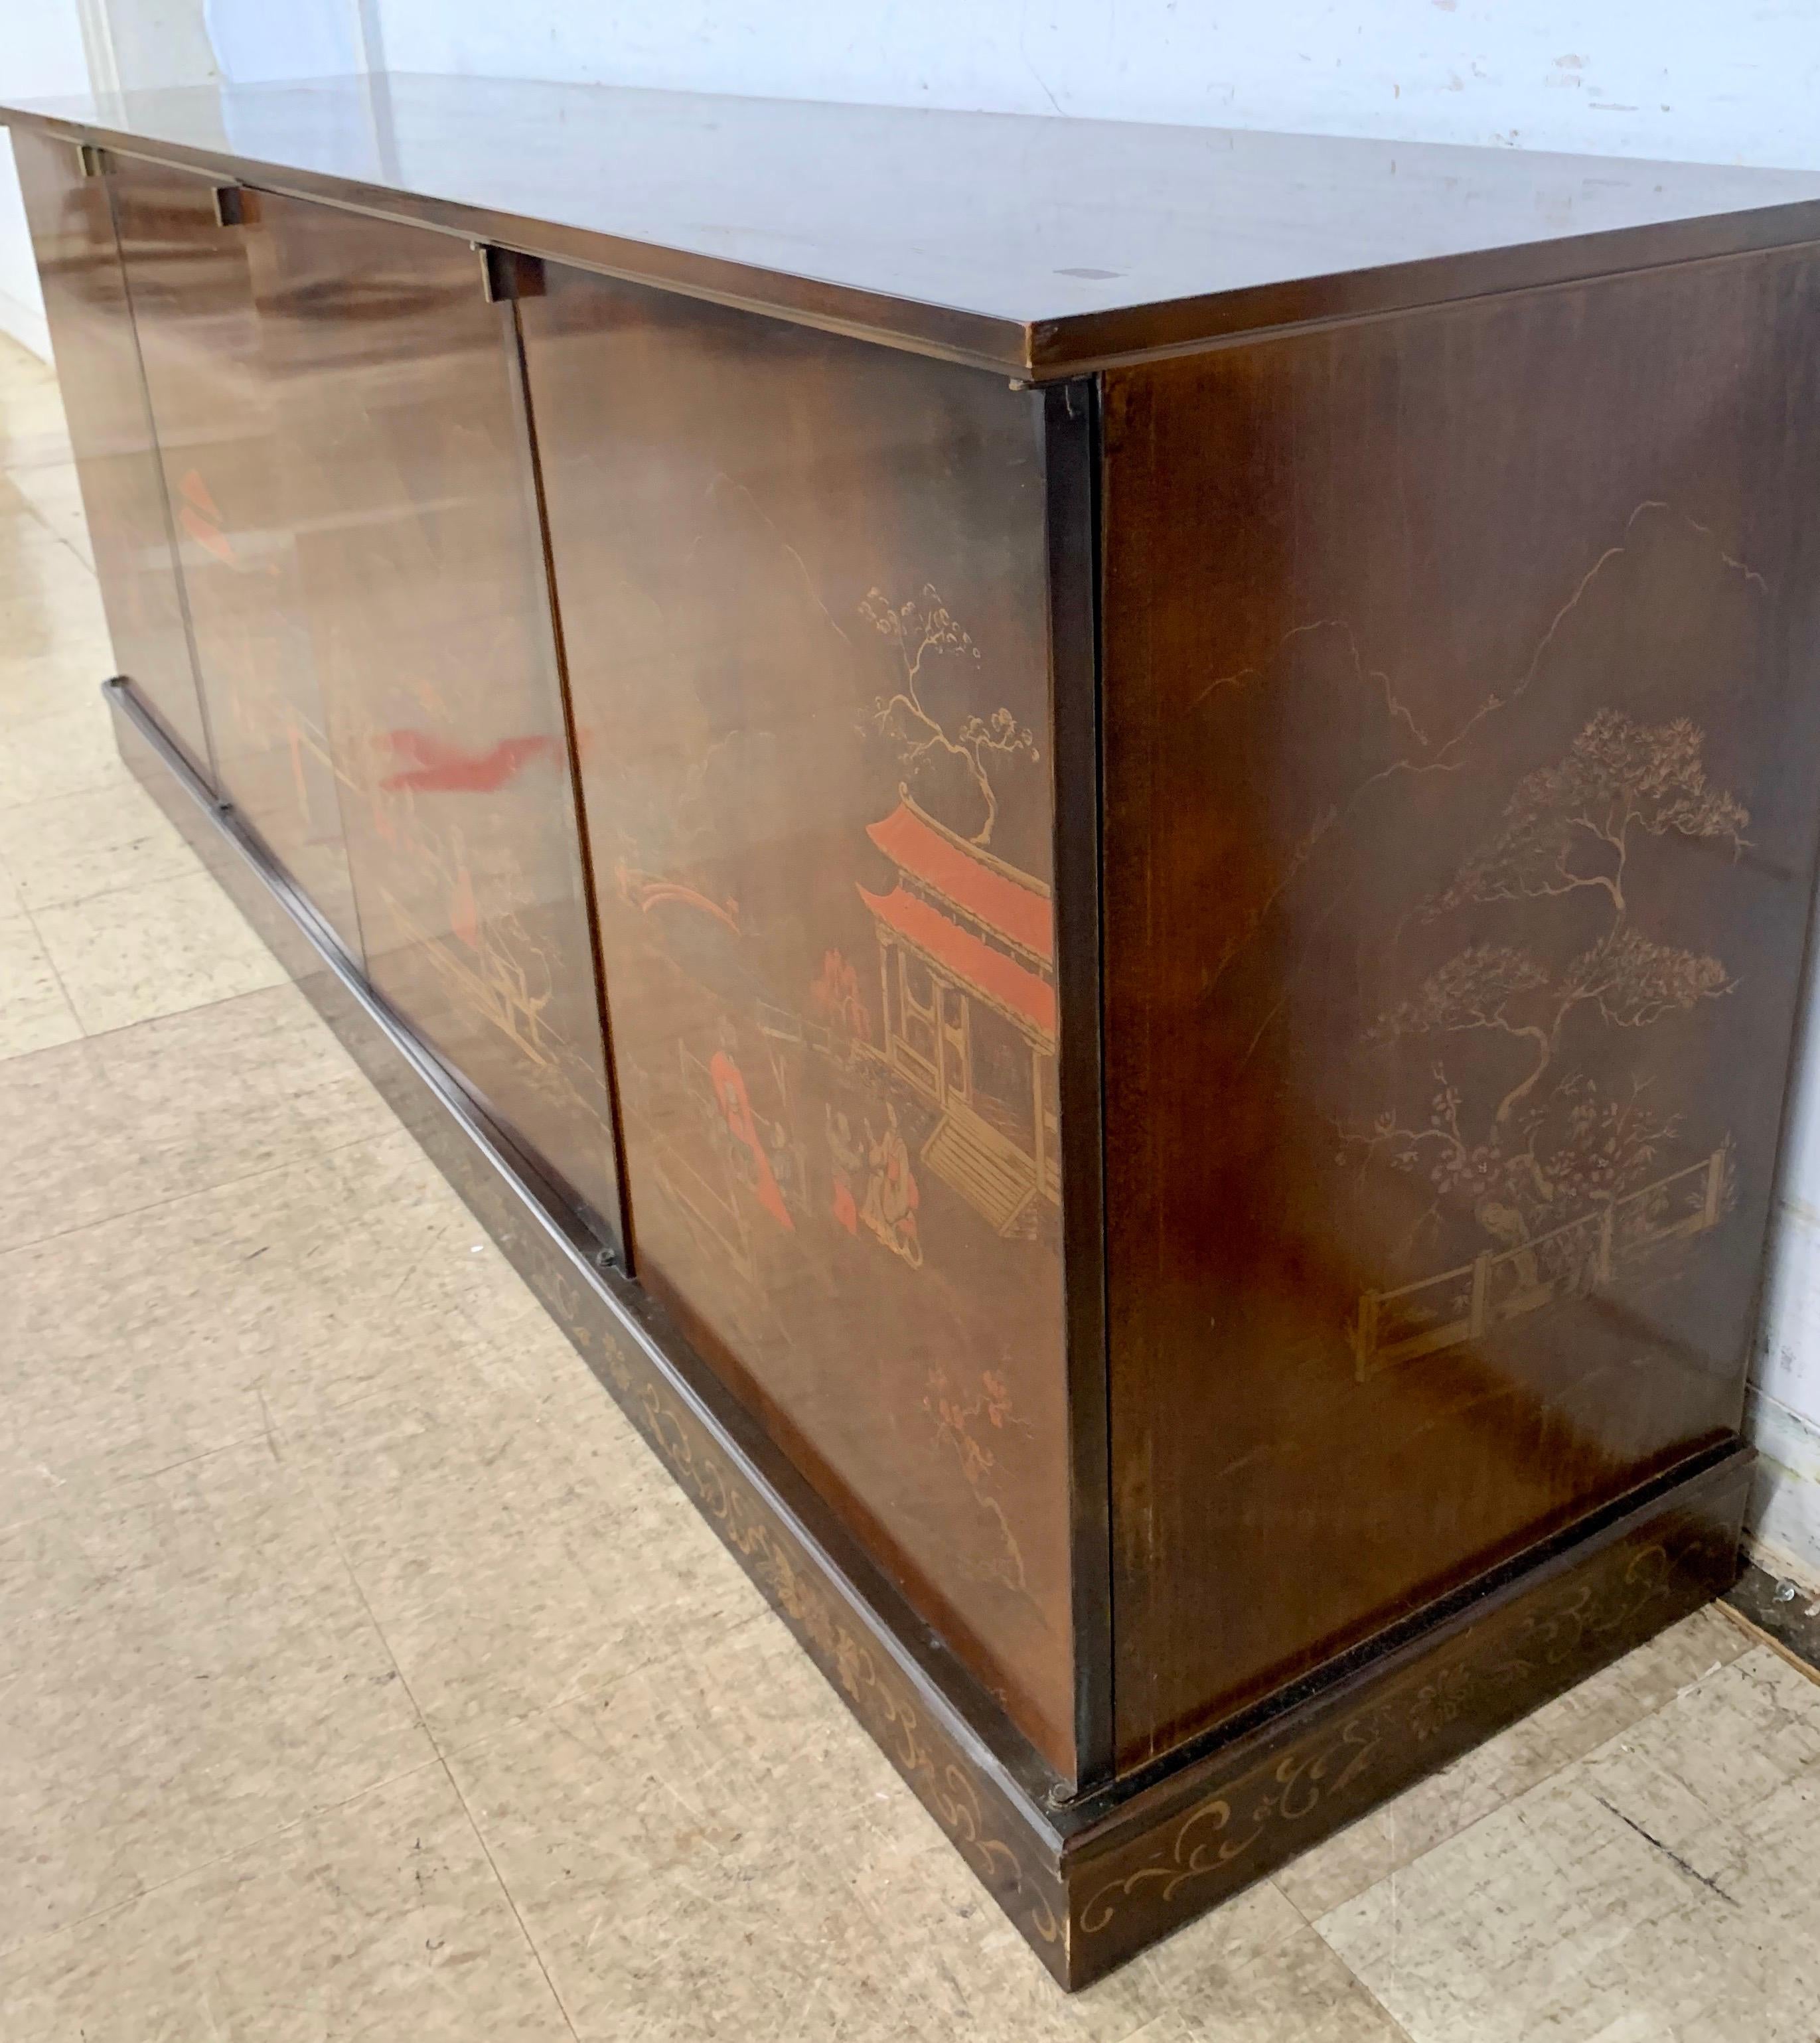 The ultimate Mid-Century Modern Chinoiserie multi-purpose credenza with handpainted scenery on the front and sides. Now, more than ever, home is where the heart is. Circa 1970's. All wood, looks to be mahogany. They don't make them like this anymore.